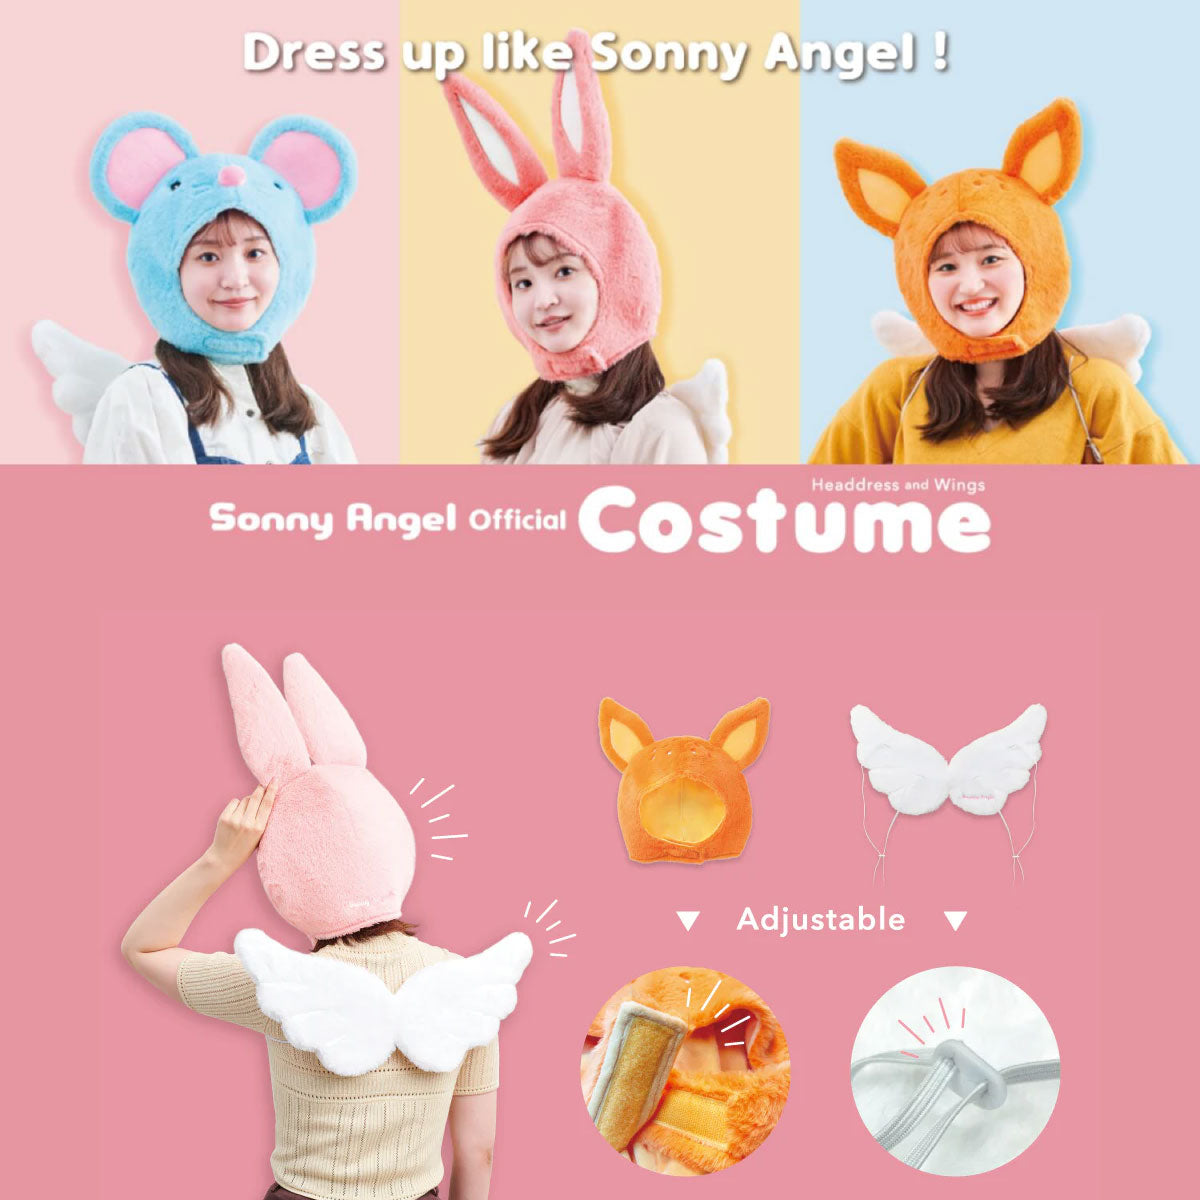 Sonny Angel Costume - Call for Availability